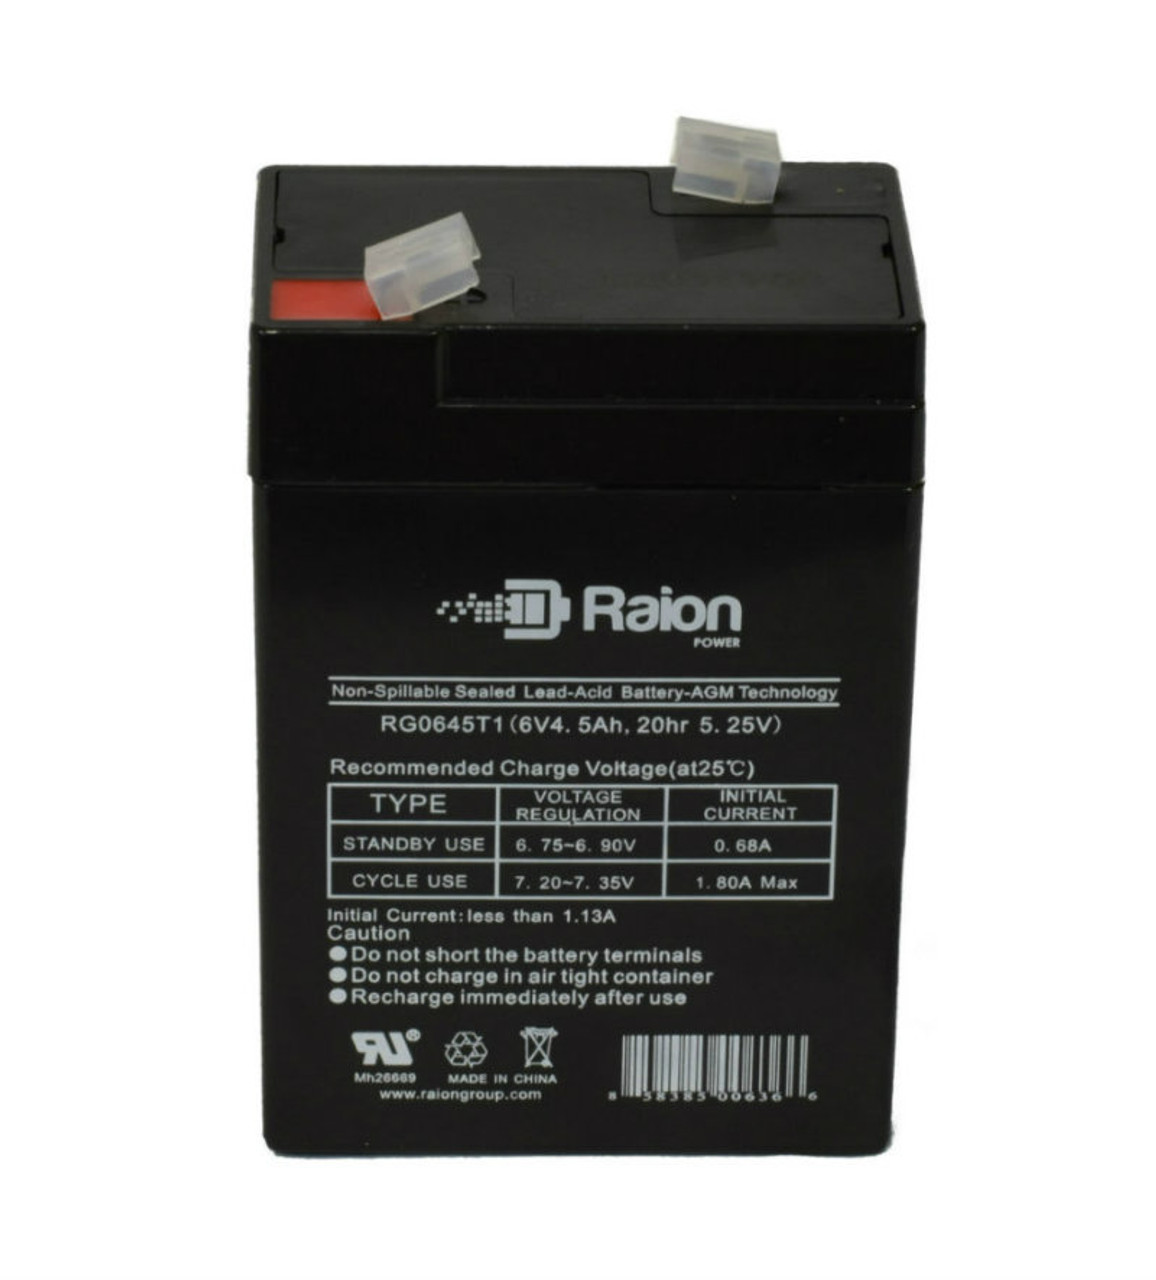 Raion Power RG0645T1 Replacement Battery Cartridge for Peg Perego ED1127 6V Fire Chief